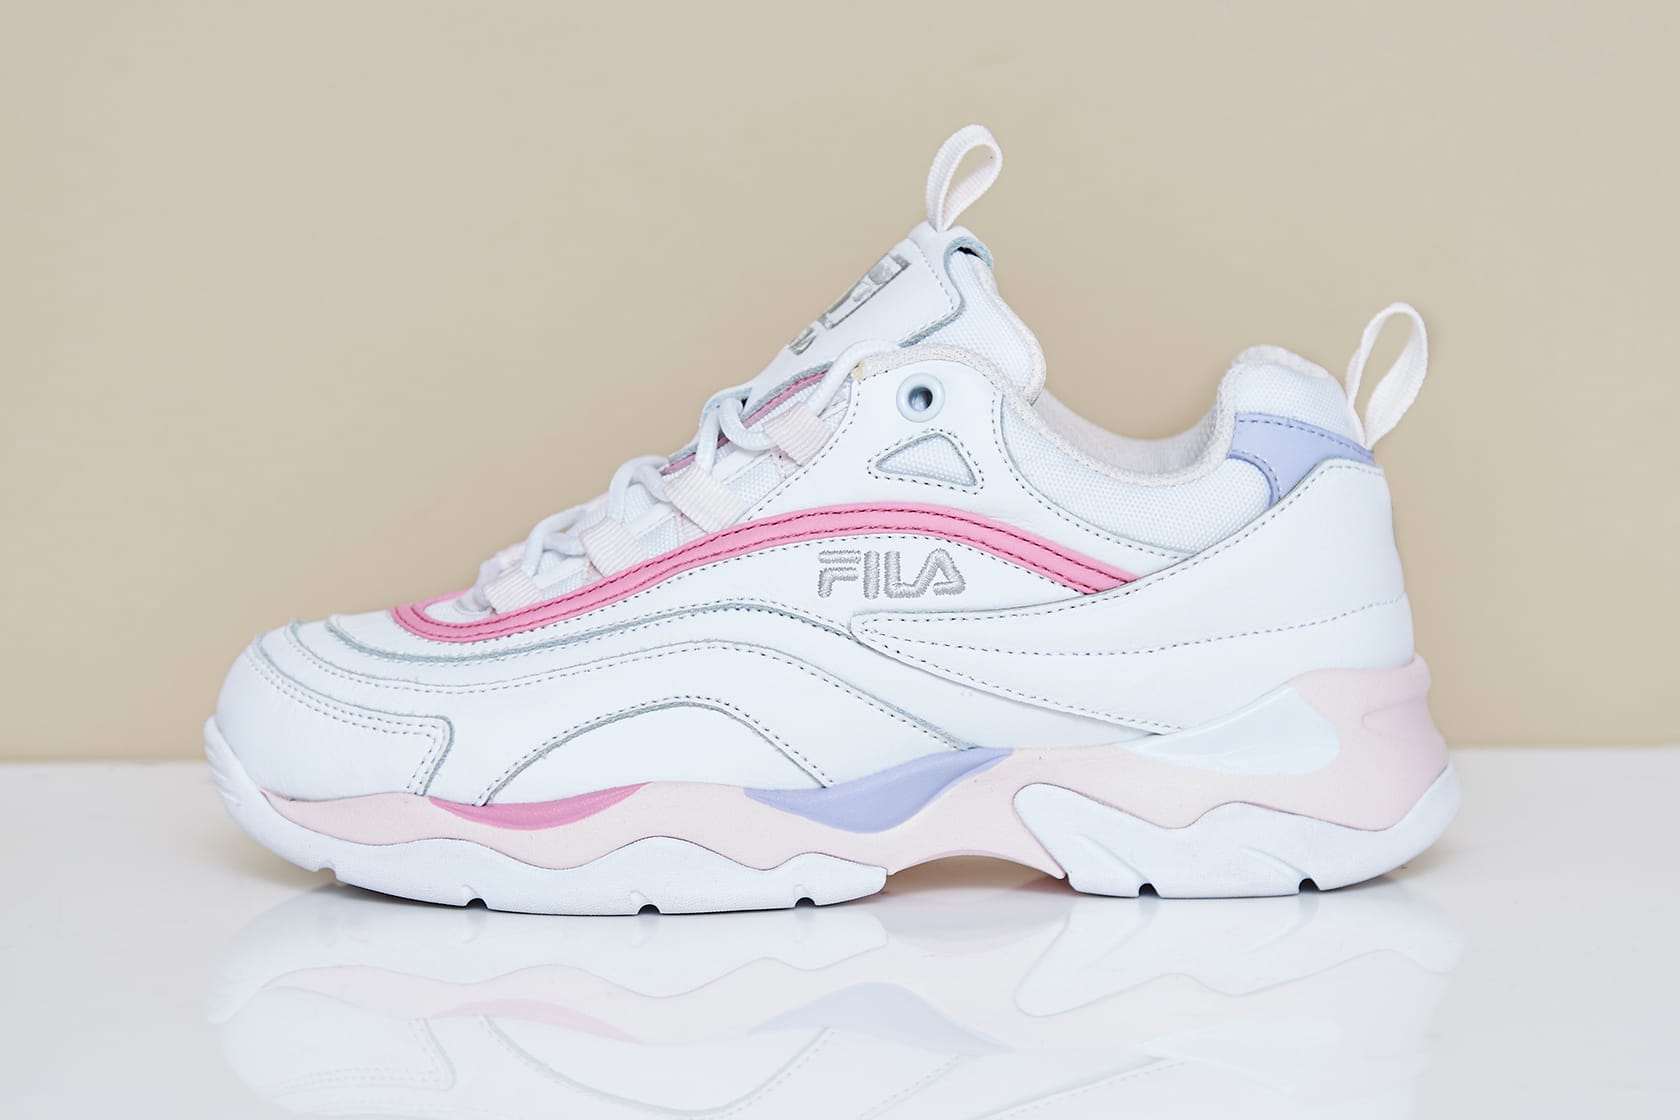 holographic fila trainers